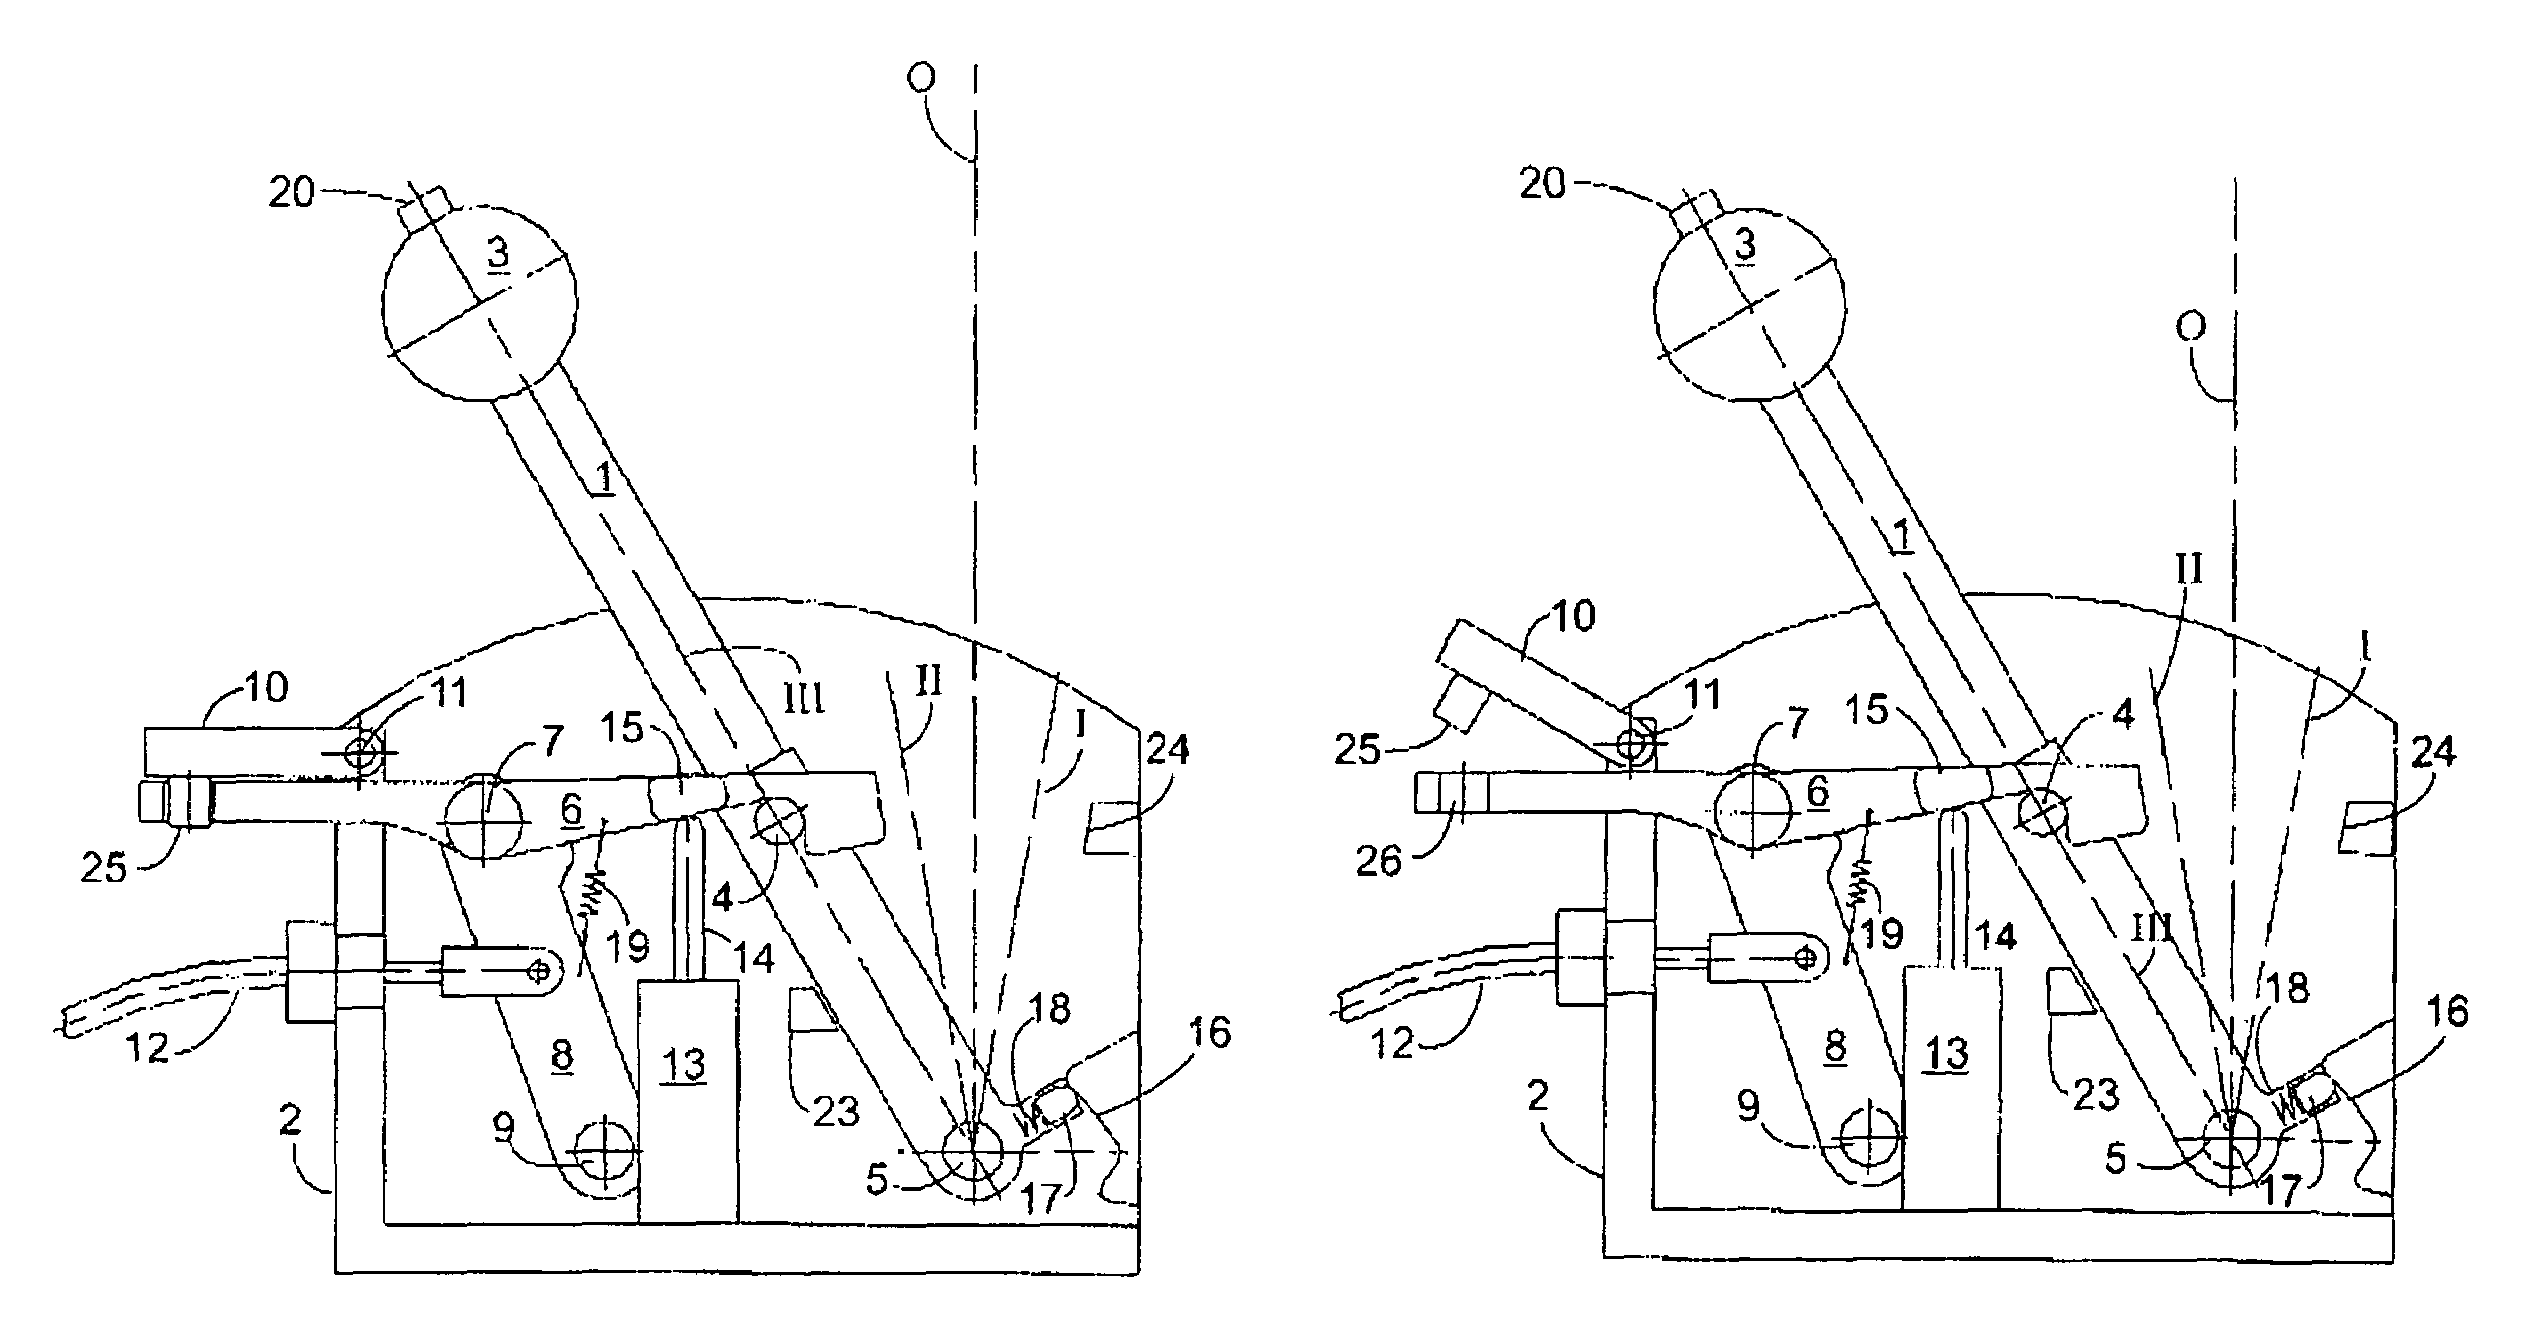 Monostable shifting device with P position